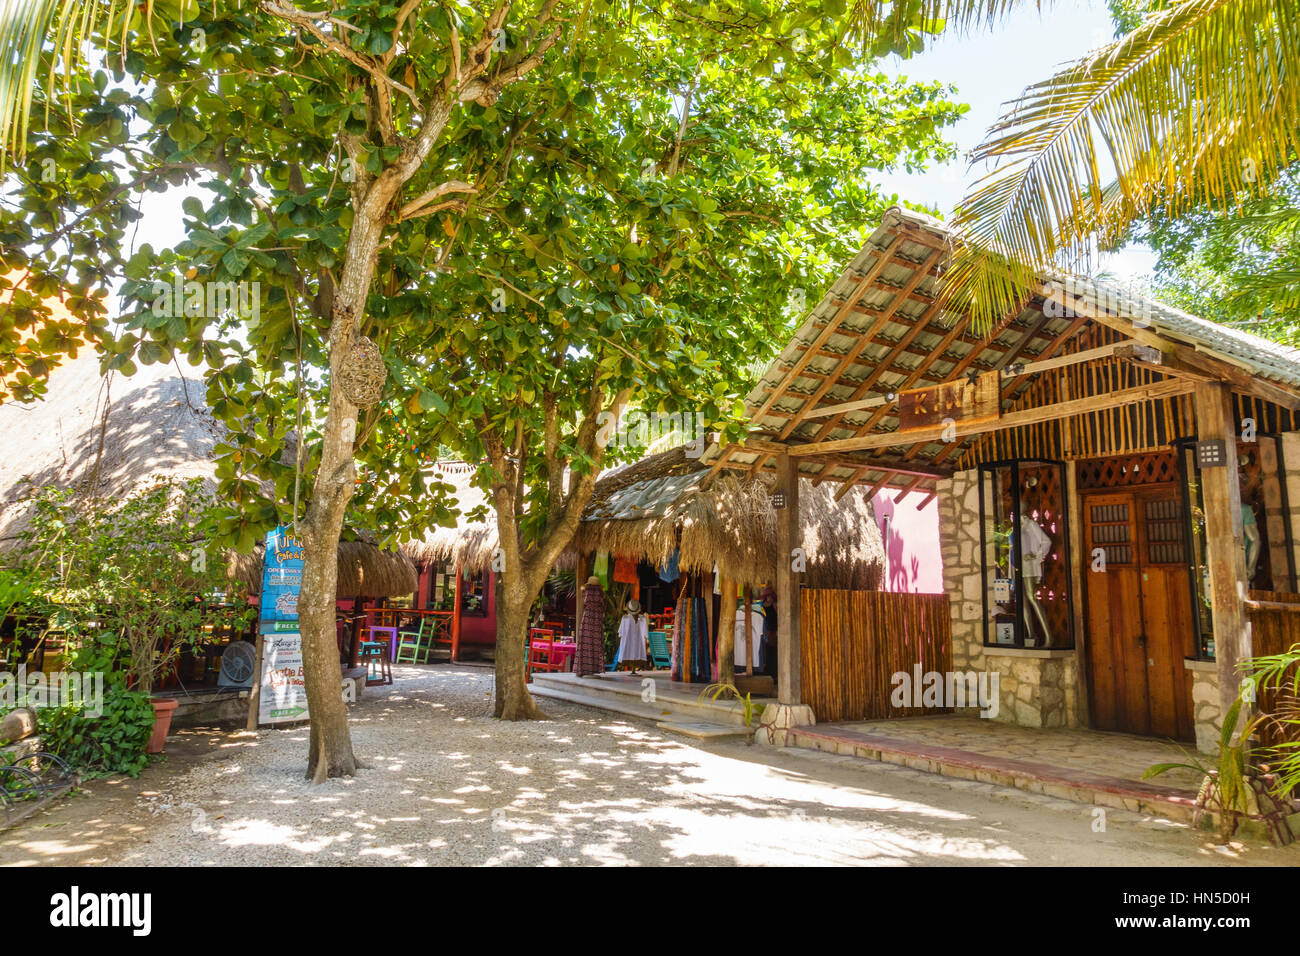 Turtle Bay Café and other rustic shops in Akumal (Place of the Turtles) along the Riviera Maya, Quintana Roo, Mexico. Stock Photo